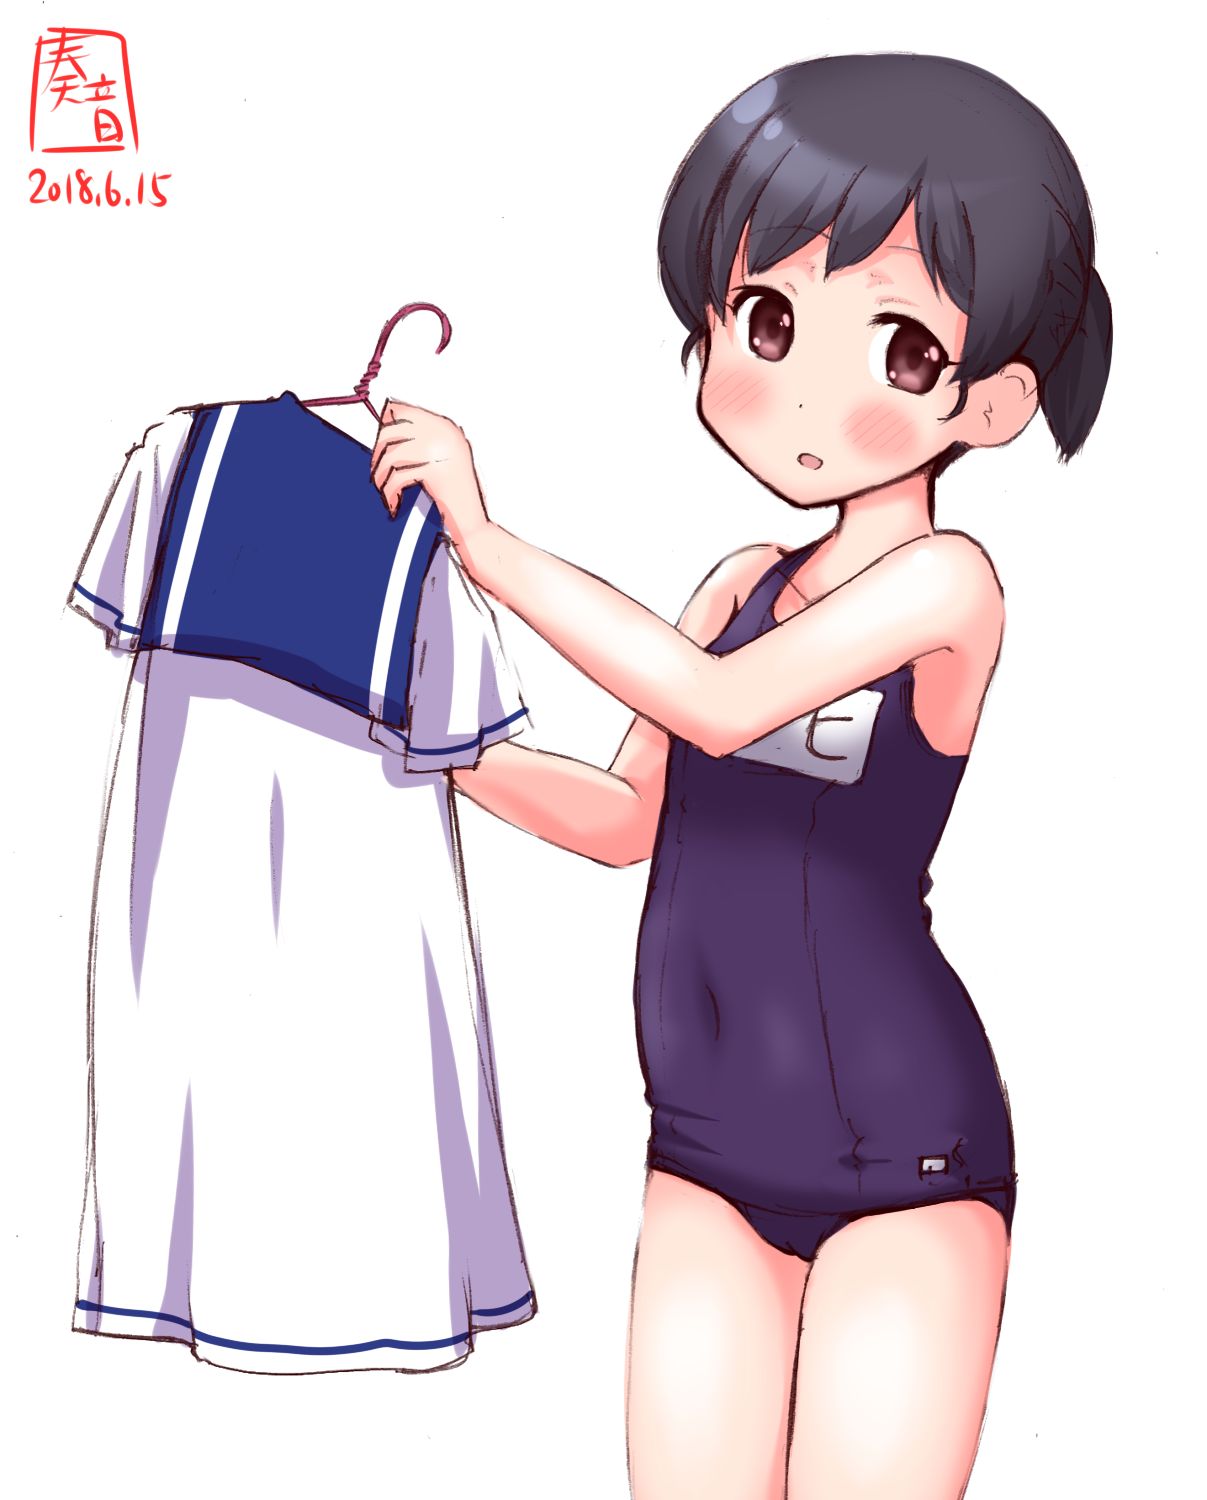 [Sun Peng-chan (ship this)] secondary erotic image of a cute Day swing of Sailor Dress in the Lollipedo sea defense ship of the fleet collection 26